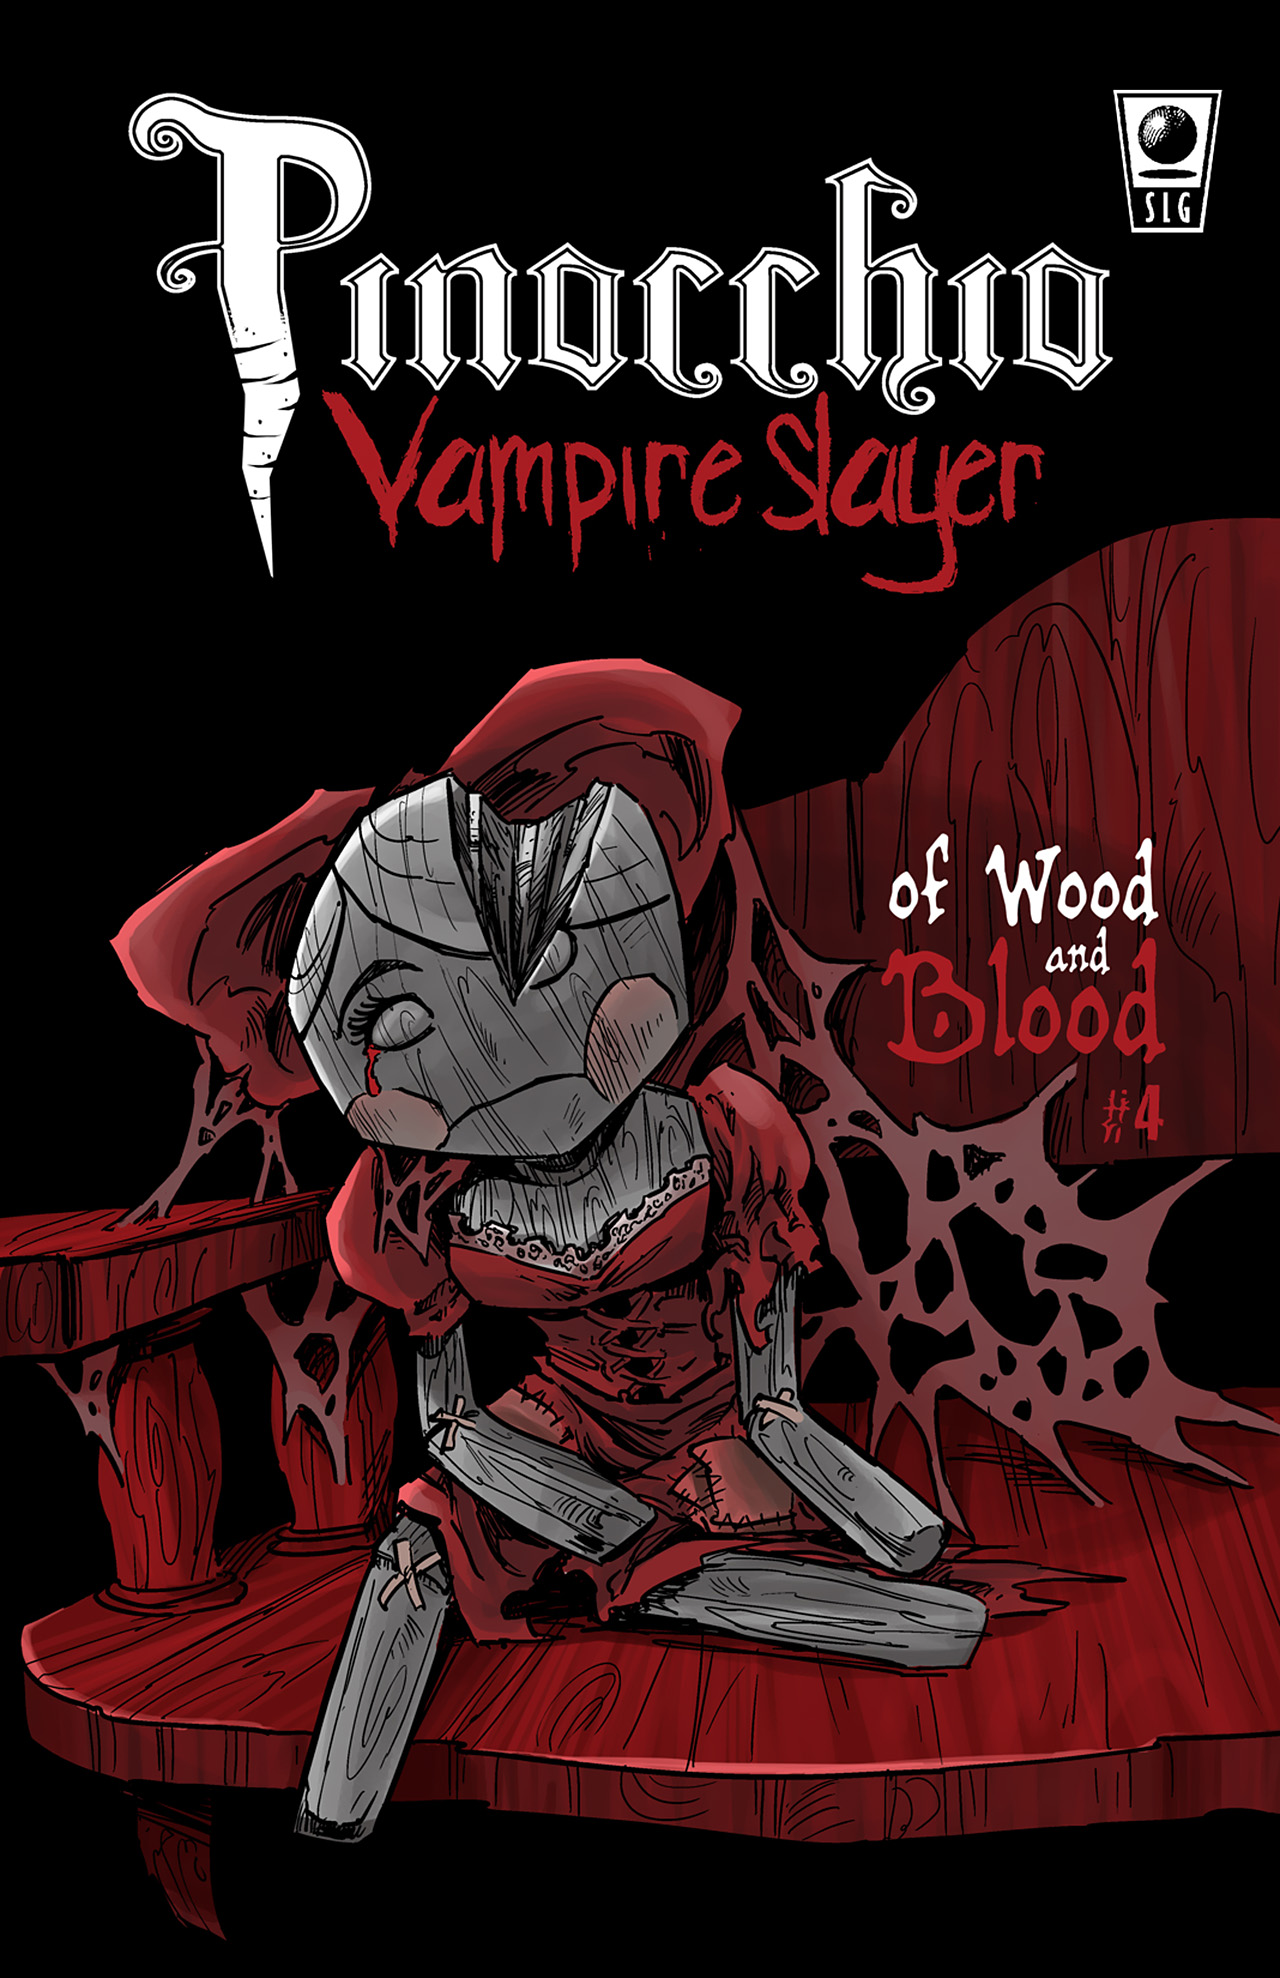 Read online Pinocchio: Vampire Slayer - Of Wood and Blood comic -  Issue #4 - 1